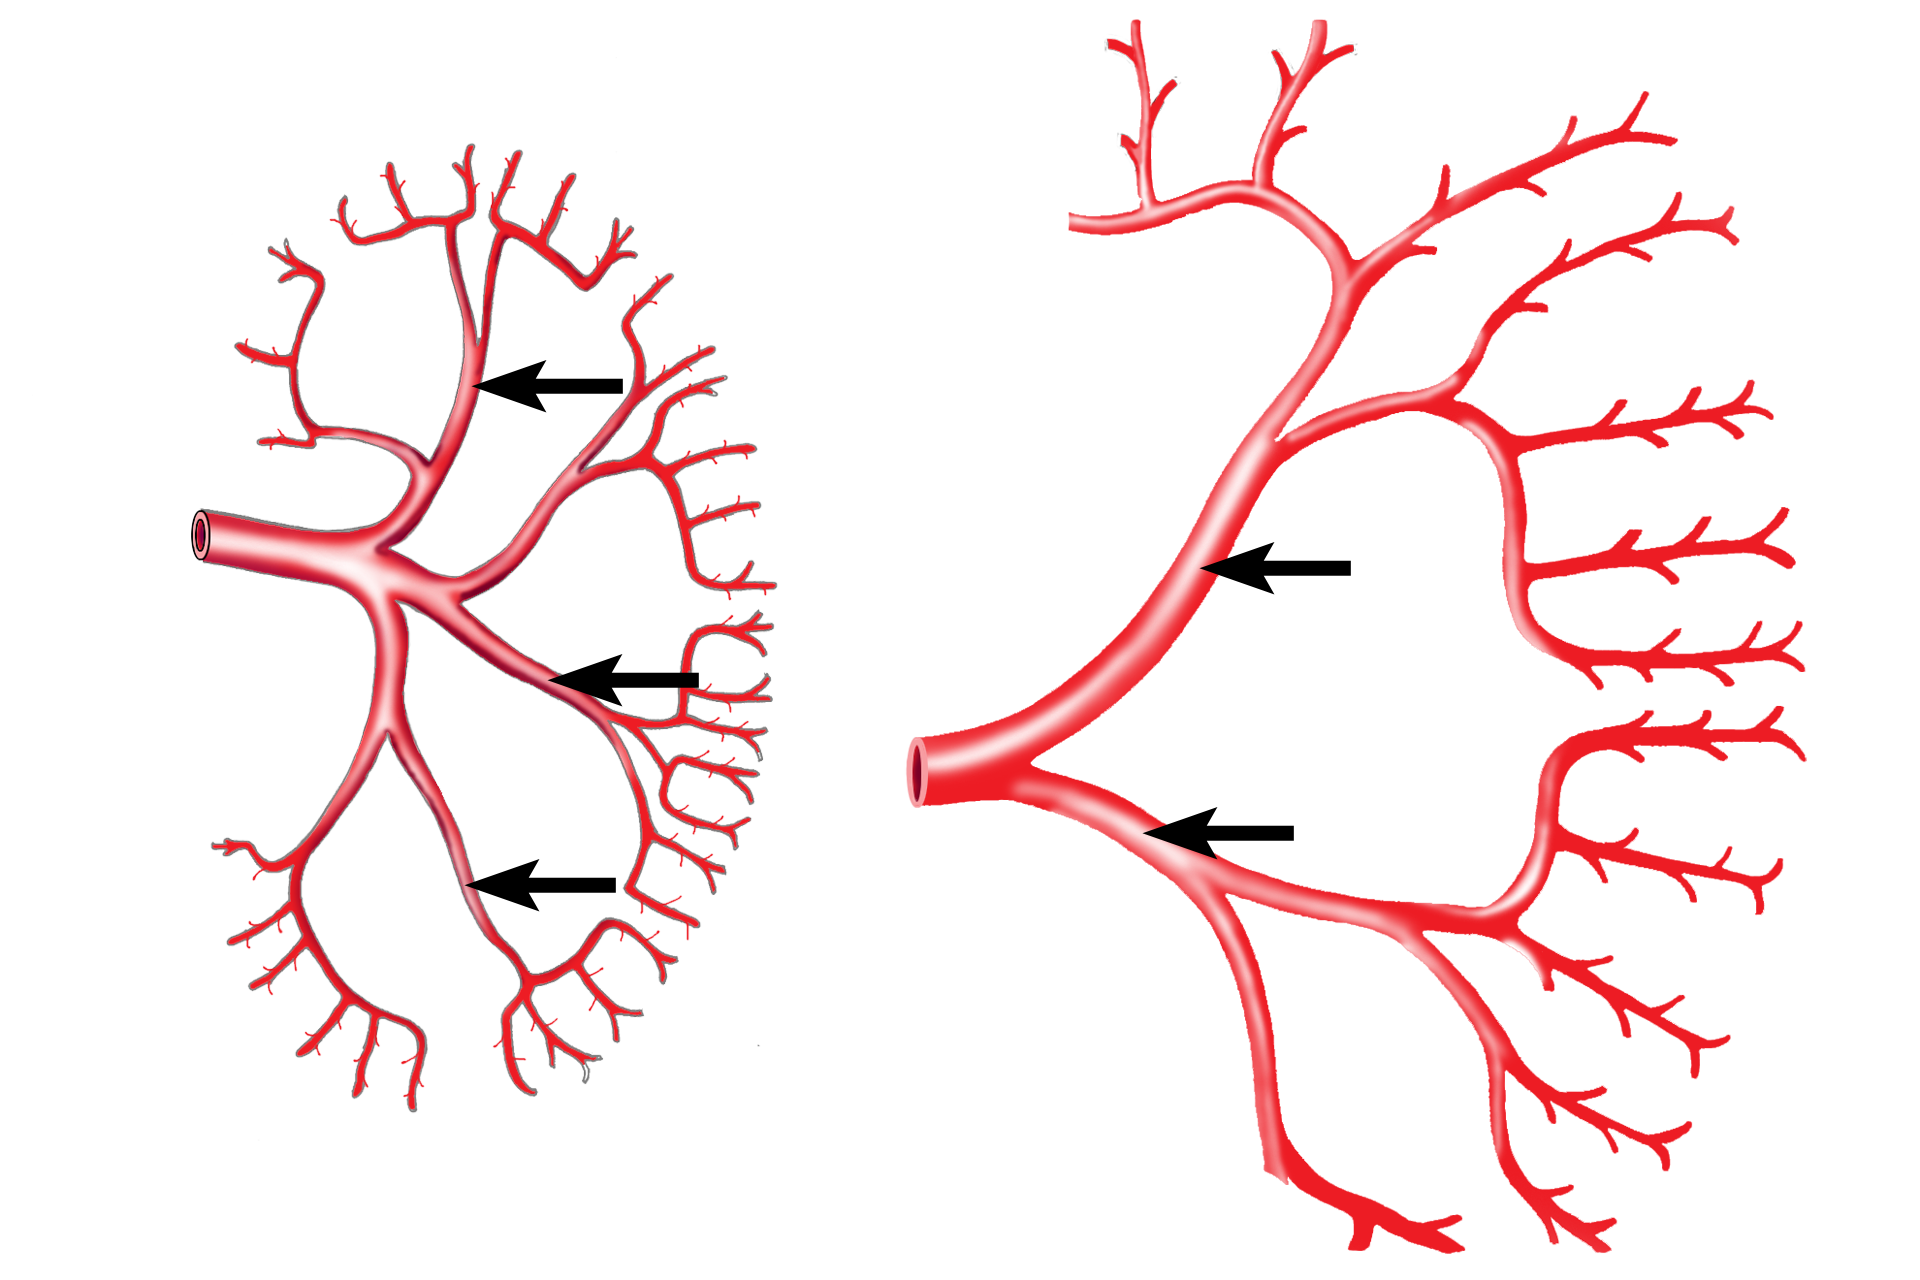  - Interlobar artery <p>When the renal artery enters the kidney, it branches into interlobar arteries, which travel between the pyramids through the renal columns. These arteries branch laterally to form the arcuate vessels that mark the boundary between cortex and medulla. Interlobular arteries leave the arcuates to enter the convoluted portions of the cortex.</p>
